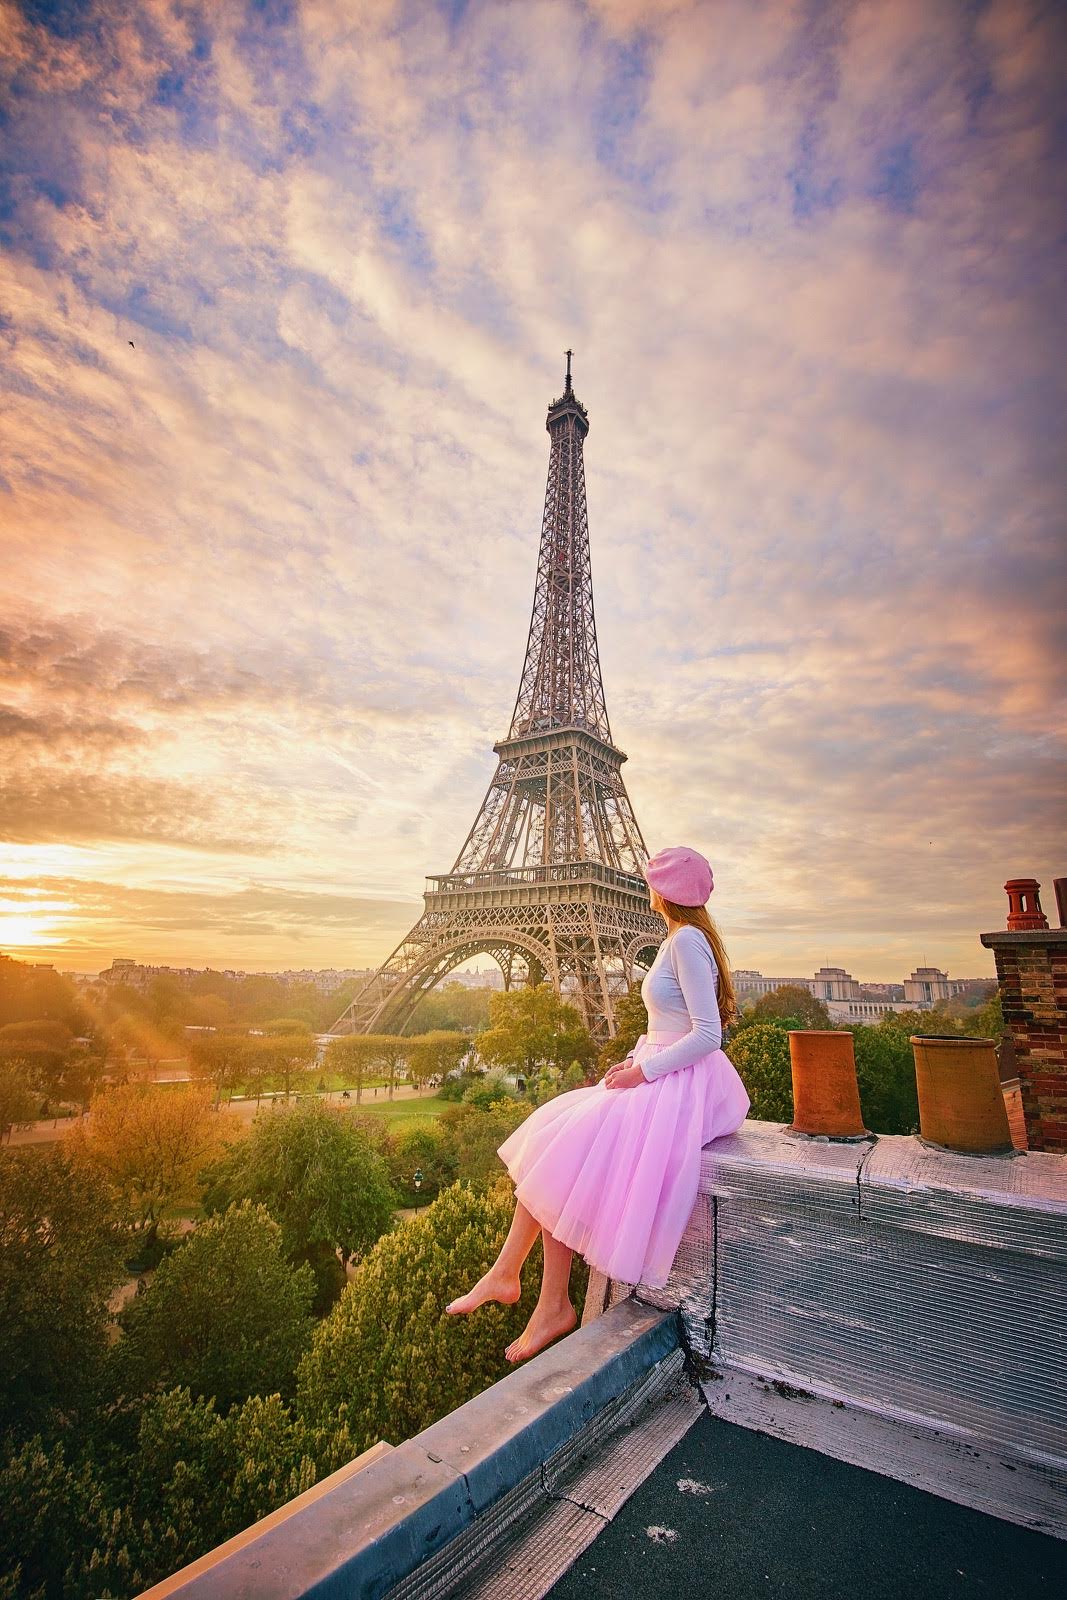 a girl sitting on the roof overlooking. the Eiffel Tower at sunset